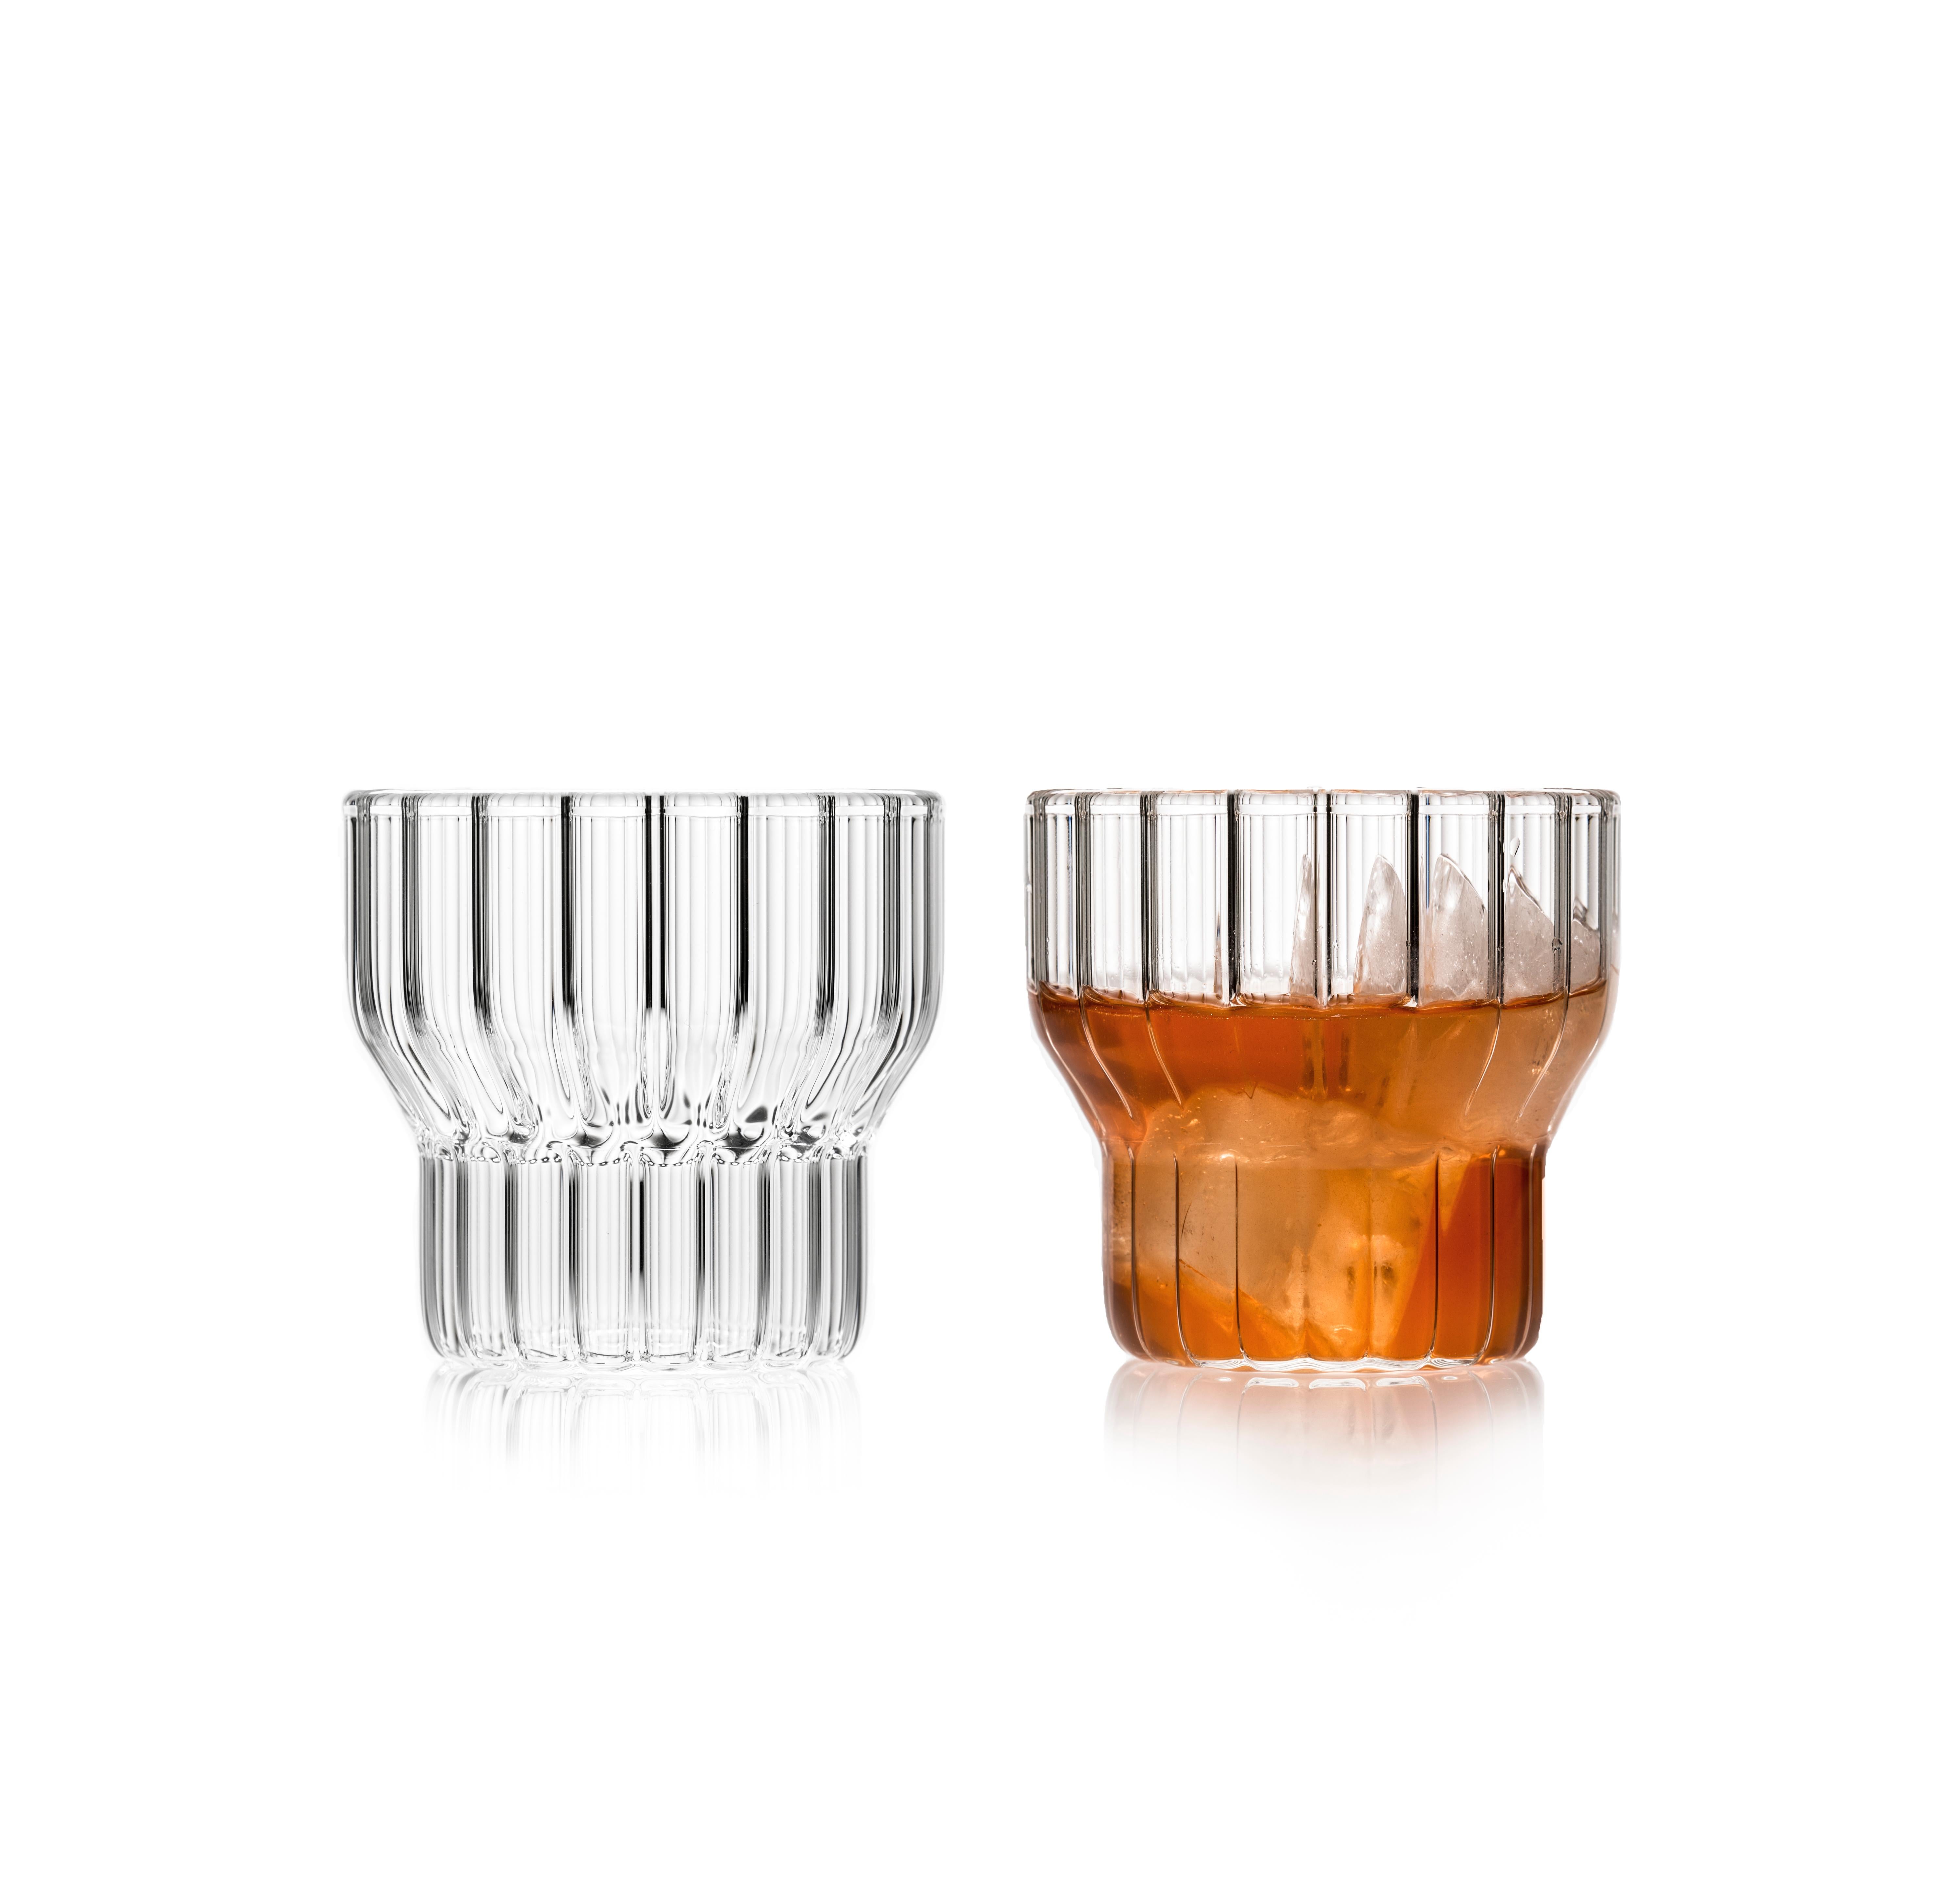 Fluted Boyd small low glasses, set of two

The clear Czech contemporary Boyd Glass collection is formally strong, yet with delicate details expressed through the lines and inner fluting. Modern yet retro, the glassware is a timeless design you